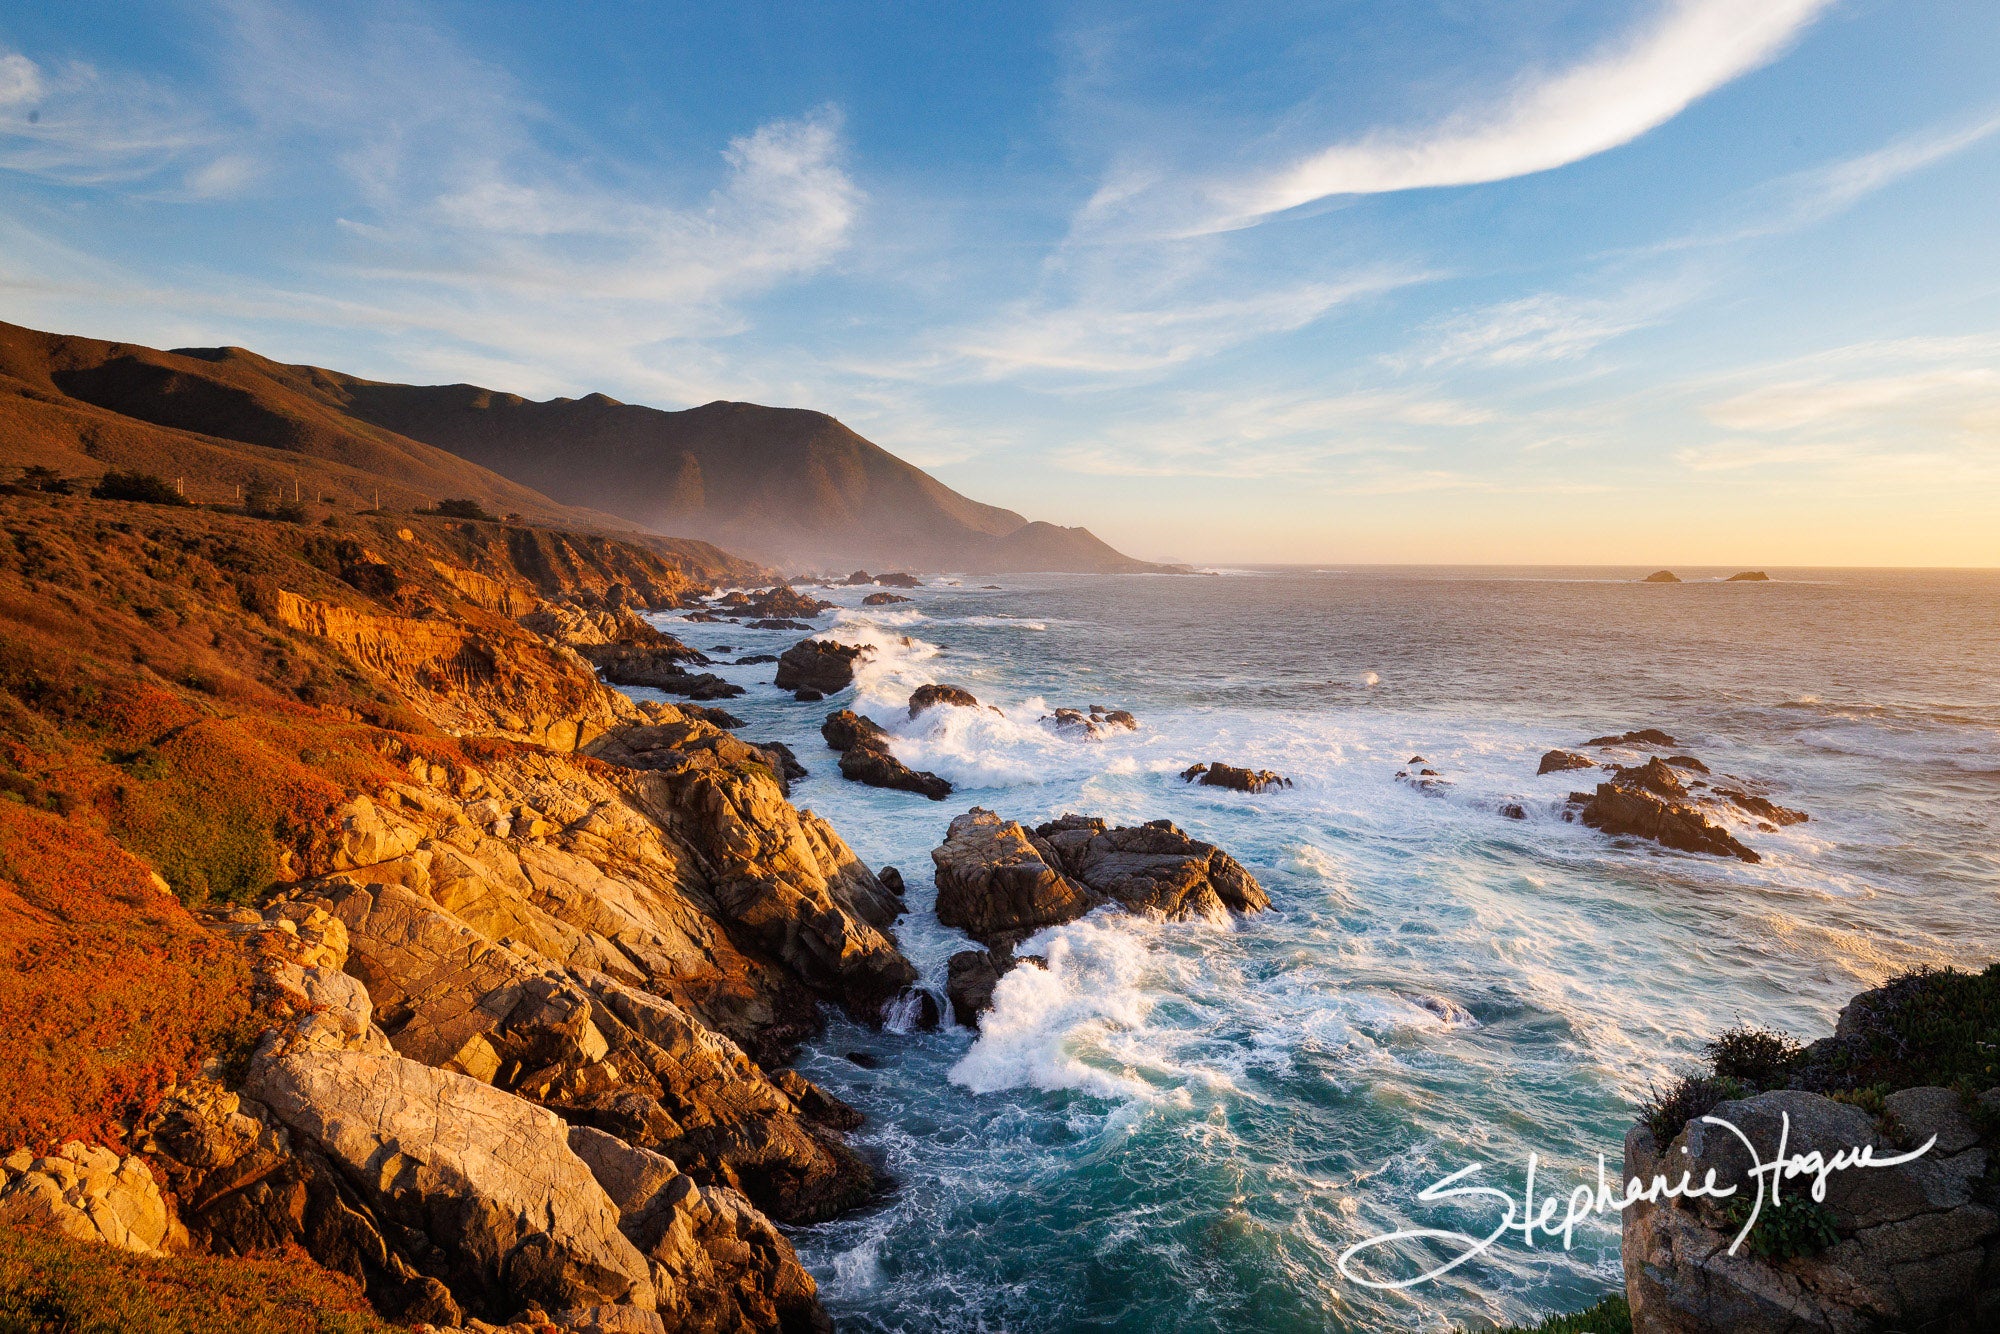 A soft sunset on the rocky coastline of Big Sur off of the iconic Pacific Coast Highway.